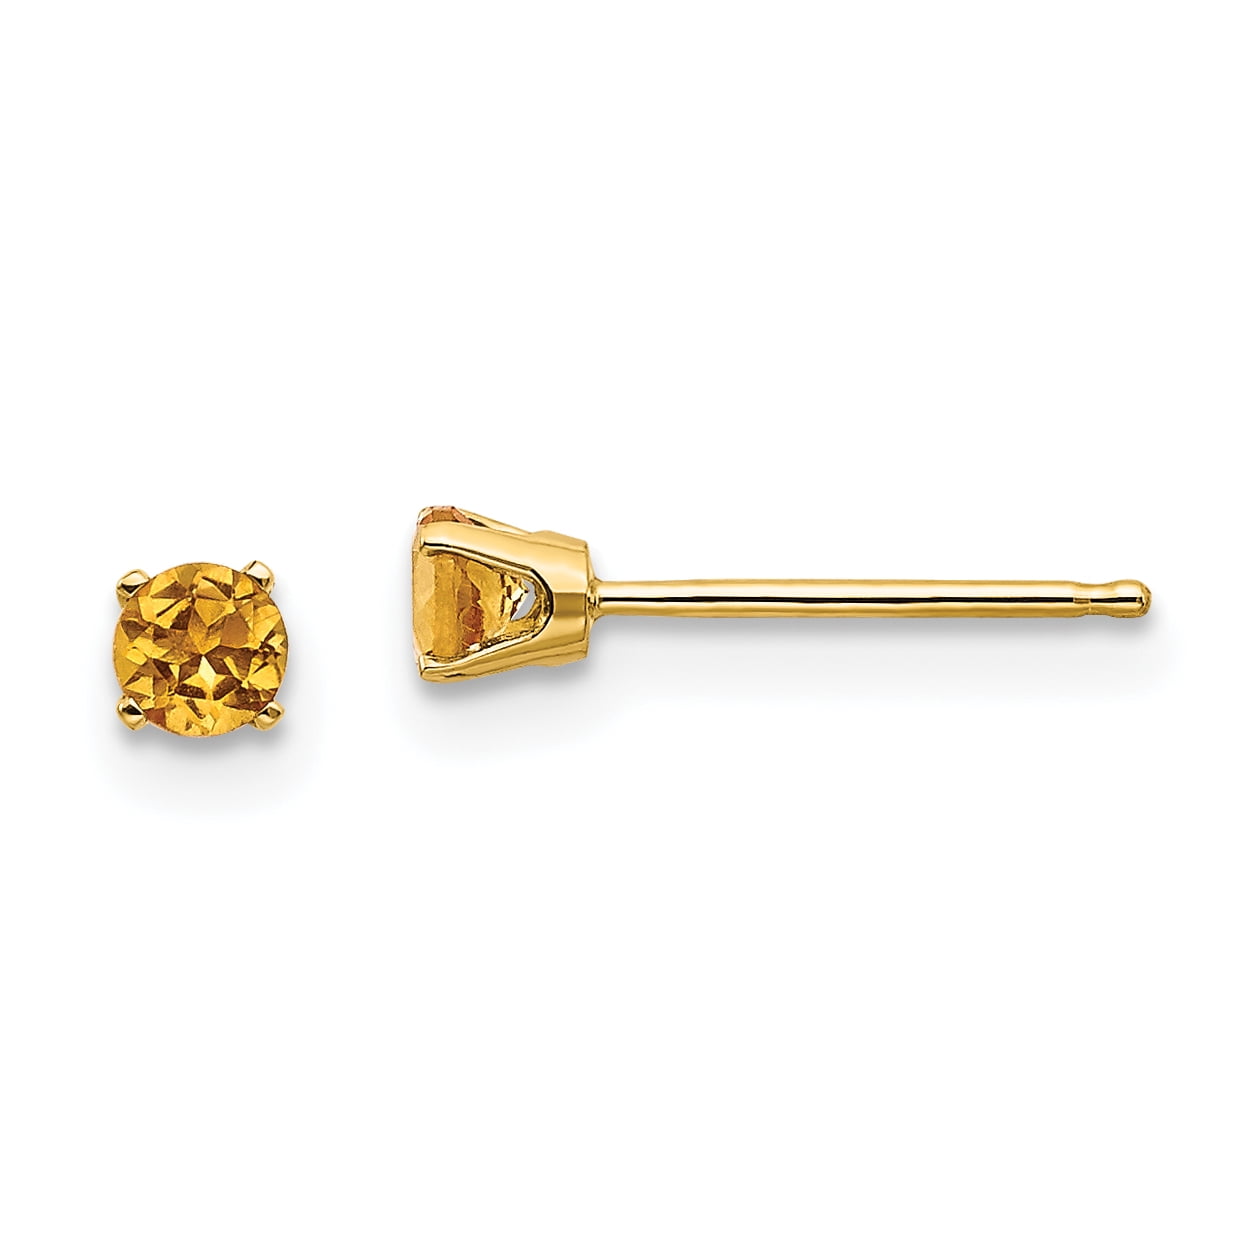 14K Yellow Gold Round Prong Birthstone Post Stud Earrings 